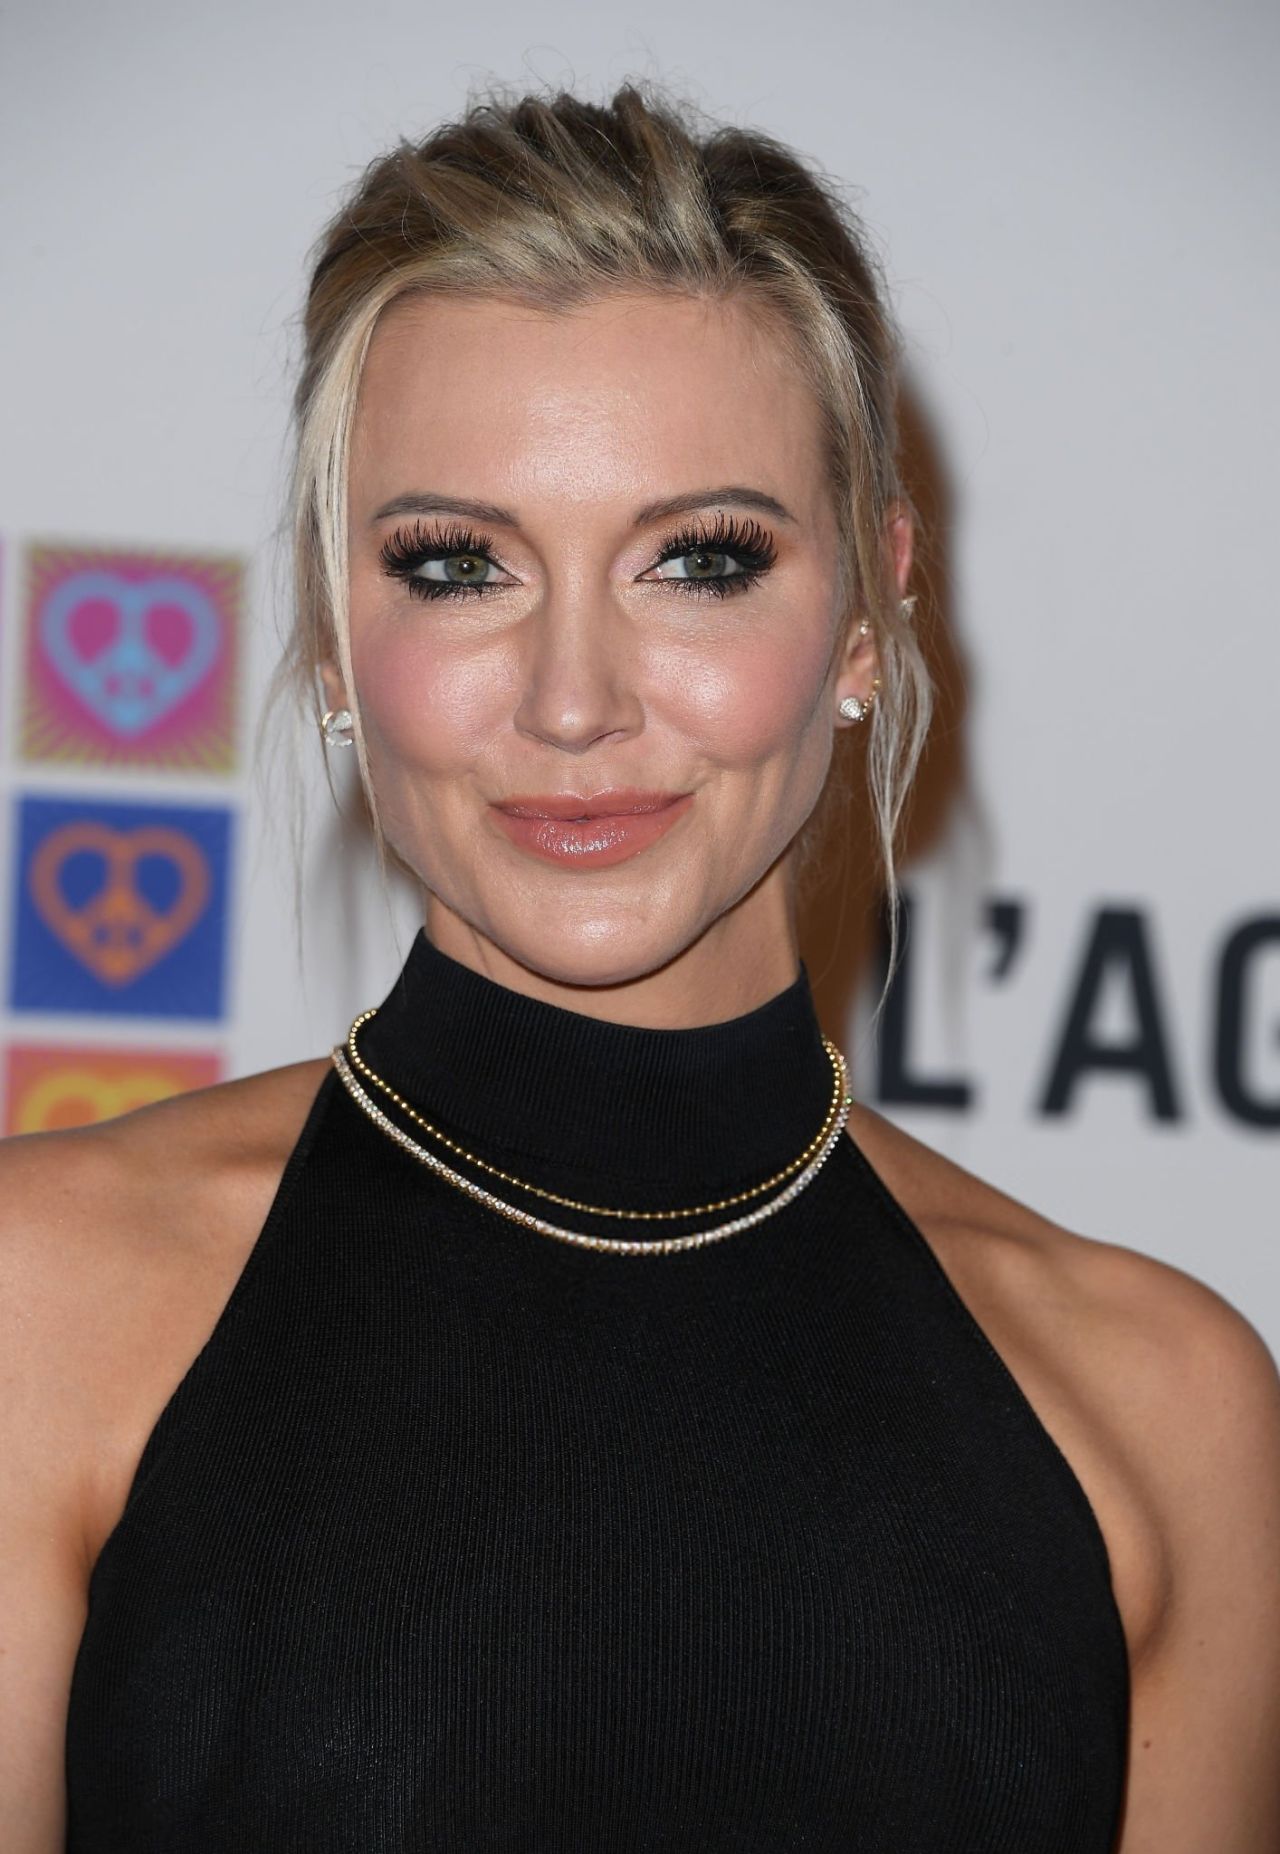 KATIE CASSIDY AT 31ST ANNUAL RACE TO ERASE MS GALA AT FAIRMONT CENTURY PLAZA IN LOS ANGELES04